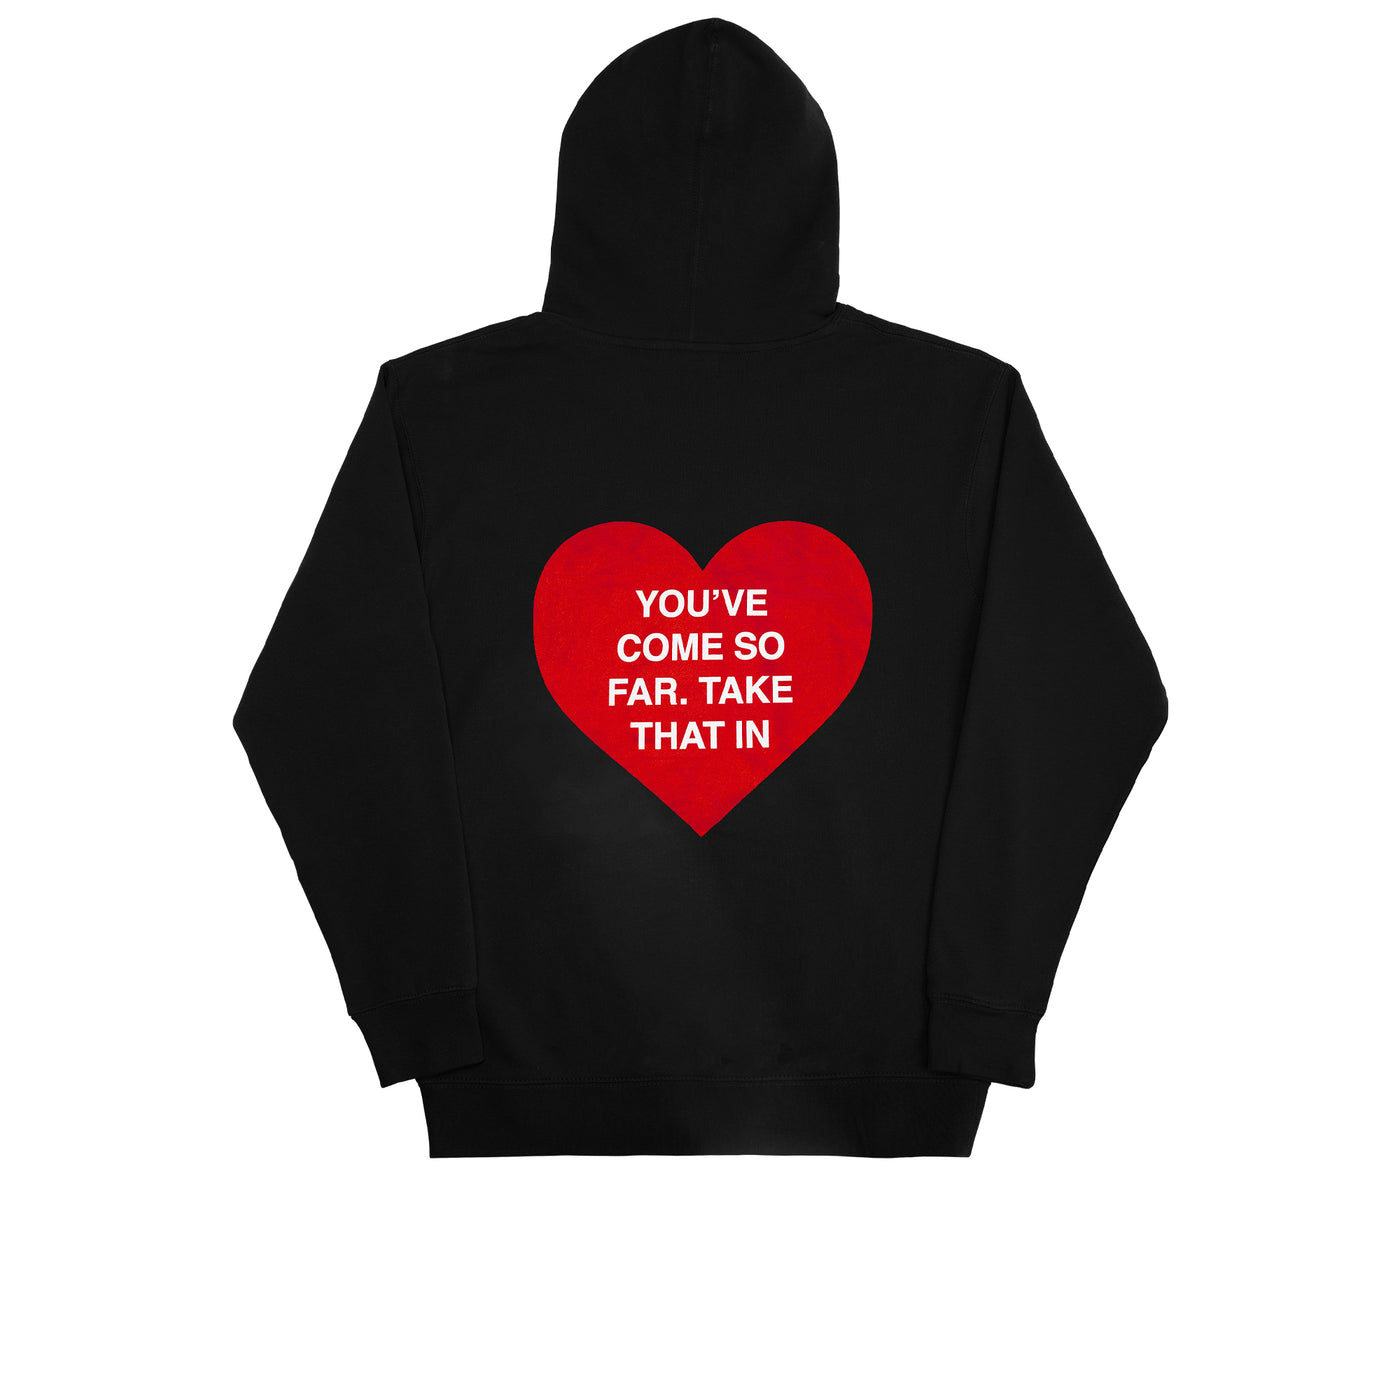 We're Not Really Strangers Black You've Come So Far Hoodie back view of Hoodie with a large red heart in center with white text overlay inside the heart reading "You've Come So Far. Take That In"